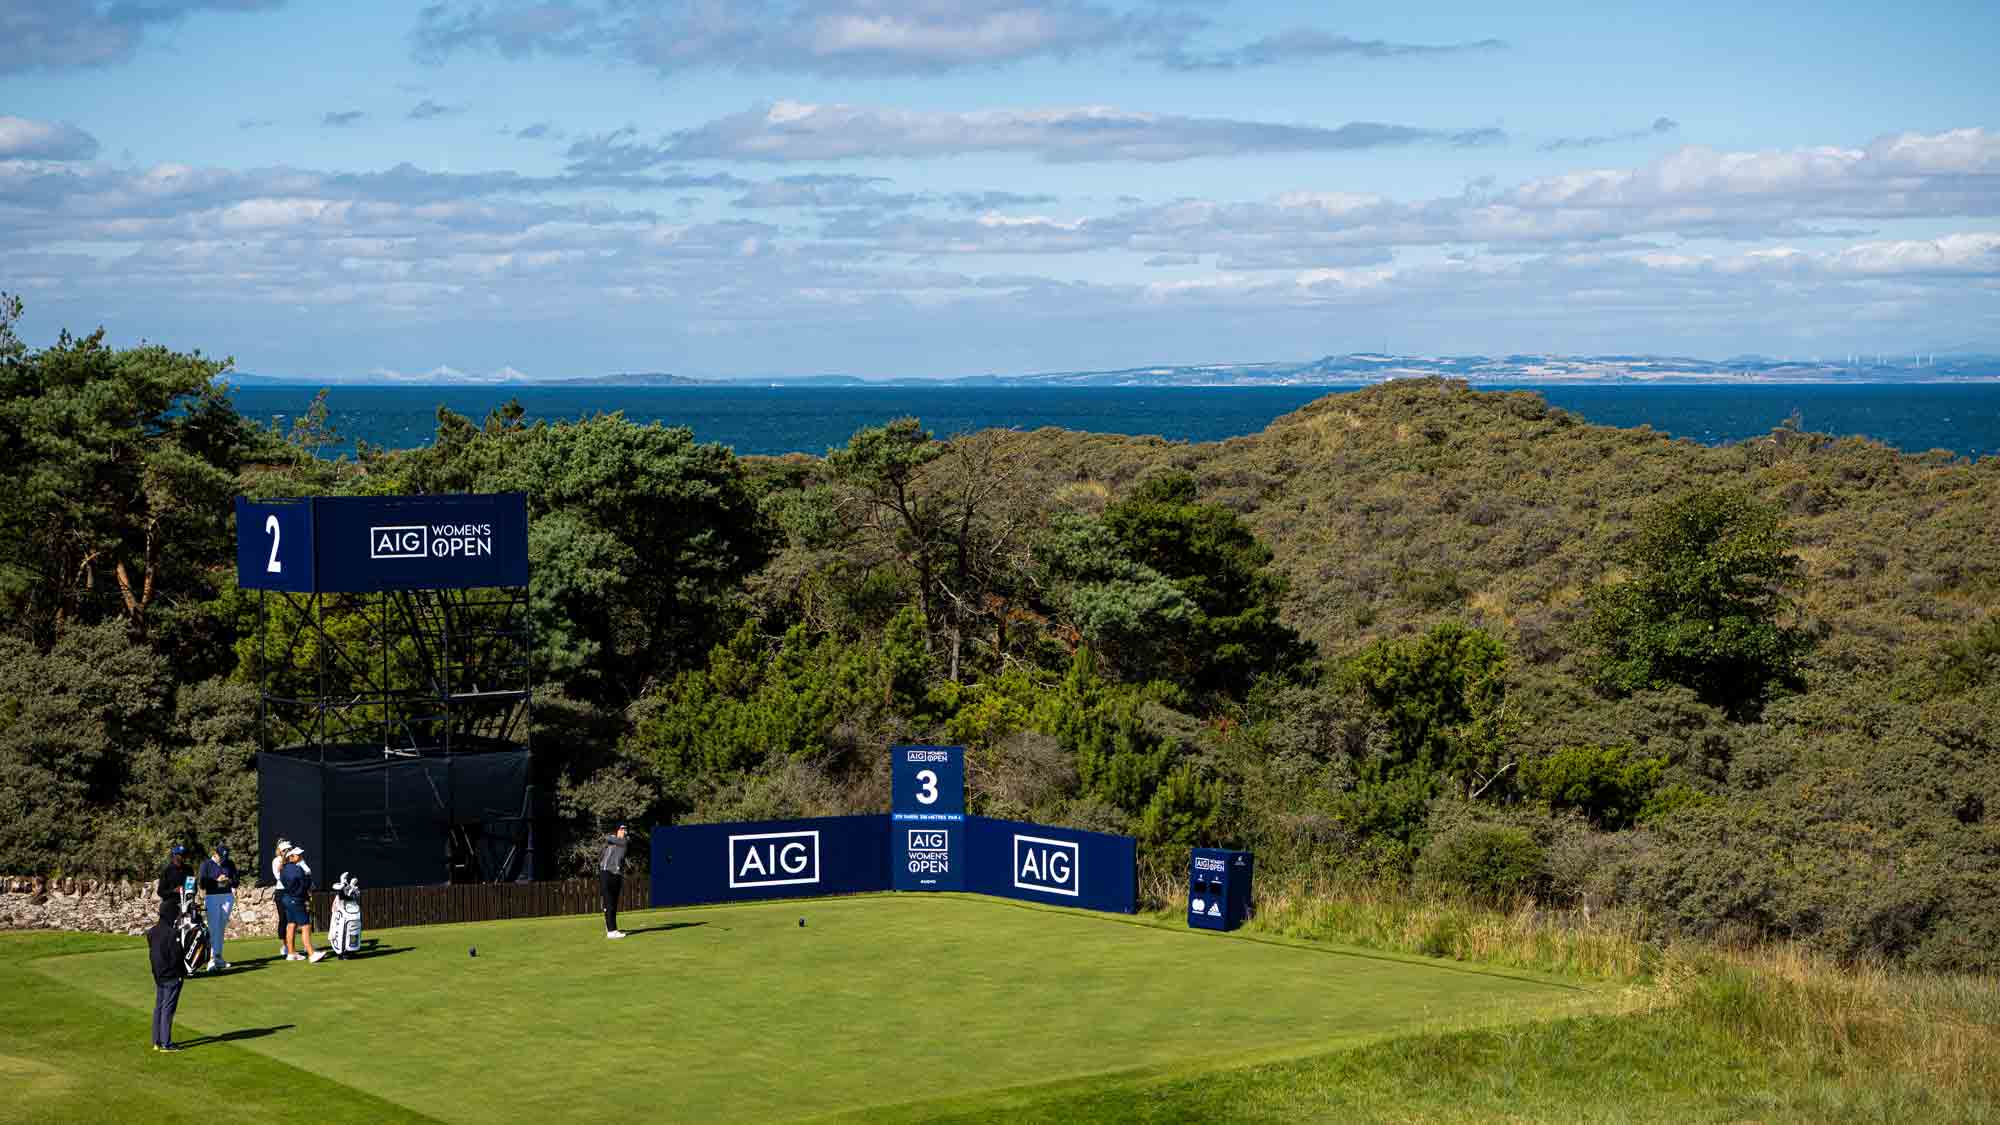 How to Watch the 2022 AIG Womens Open LPGA Ladies Professional Golf Association